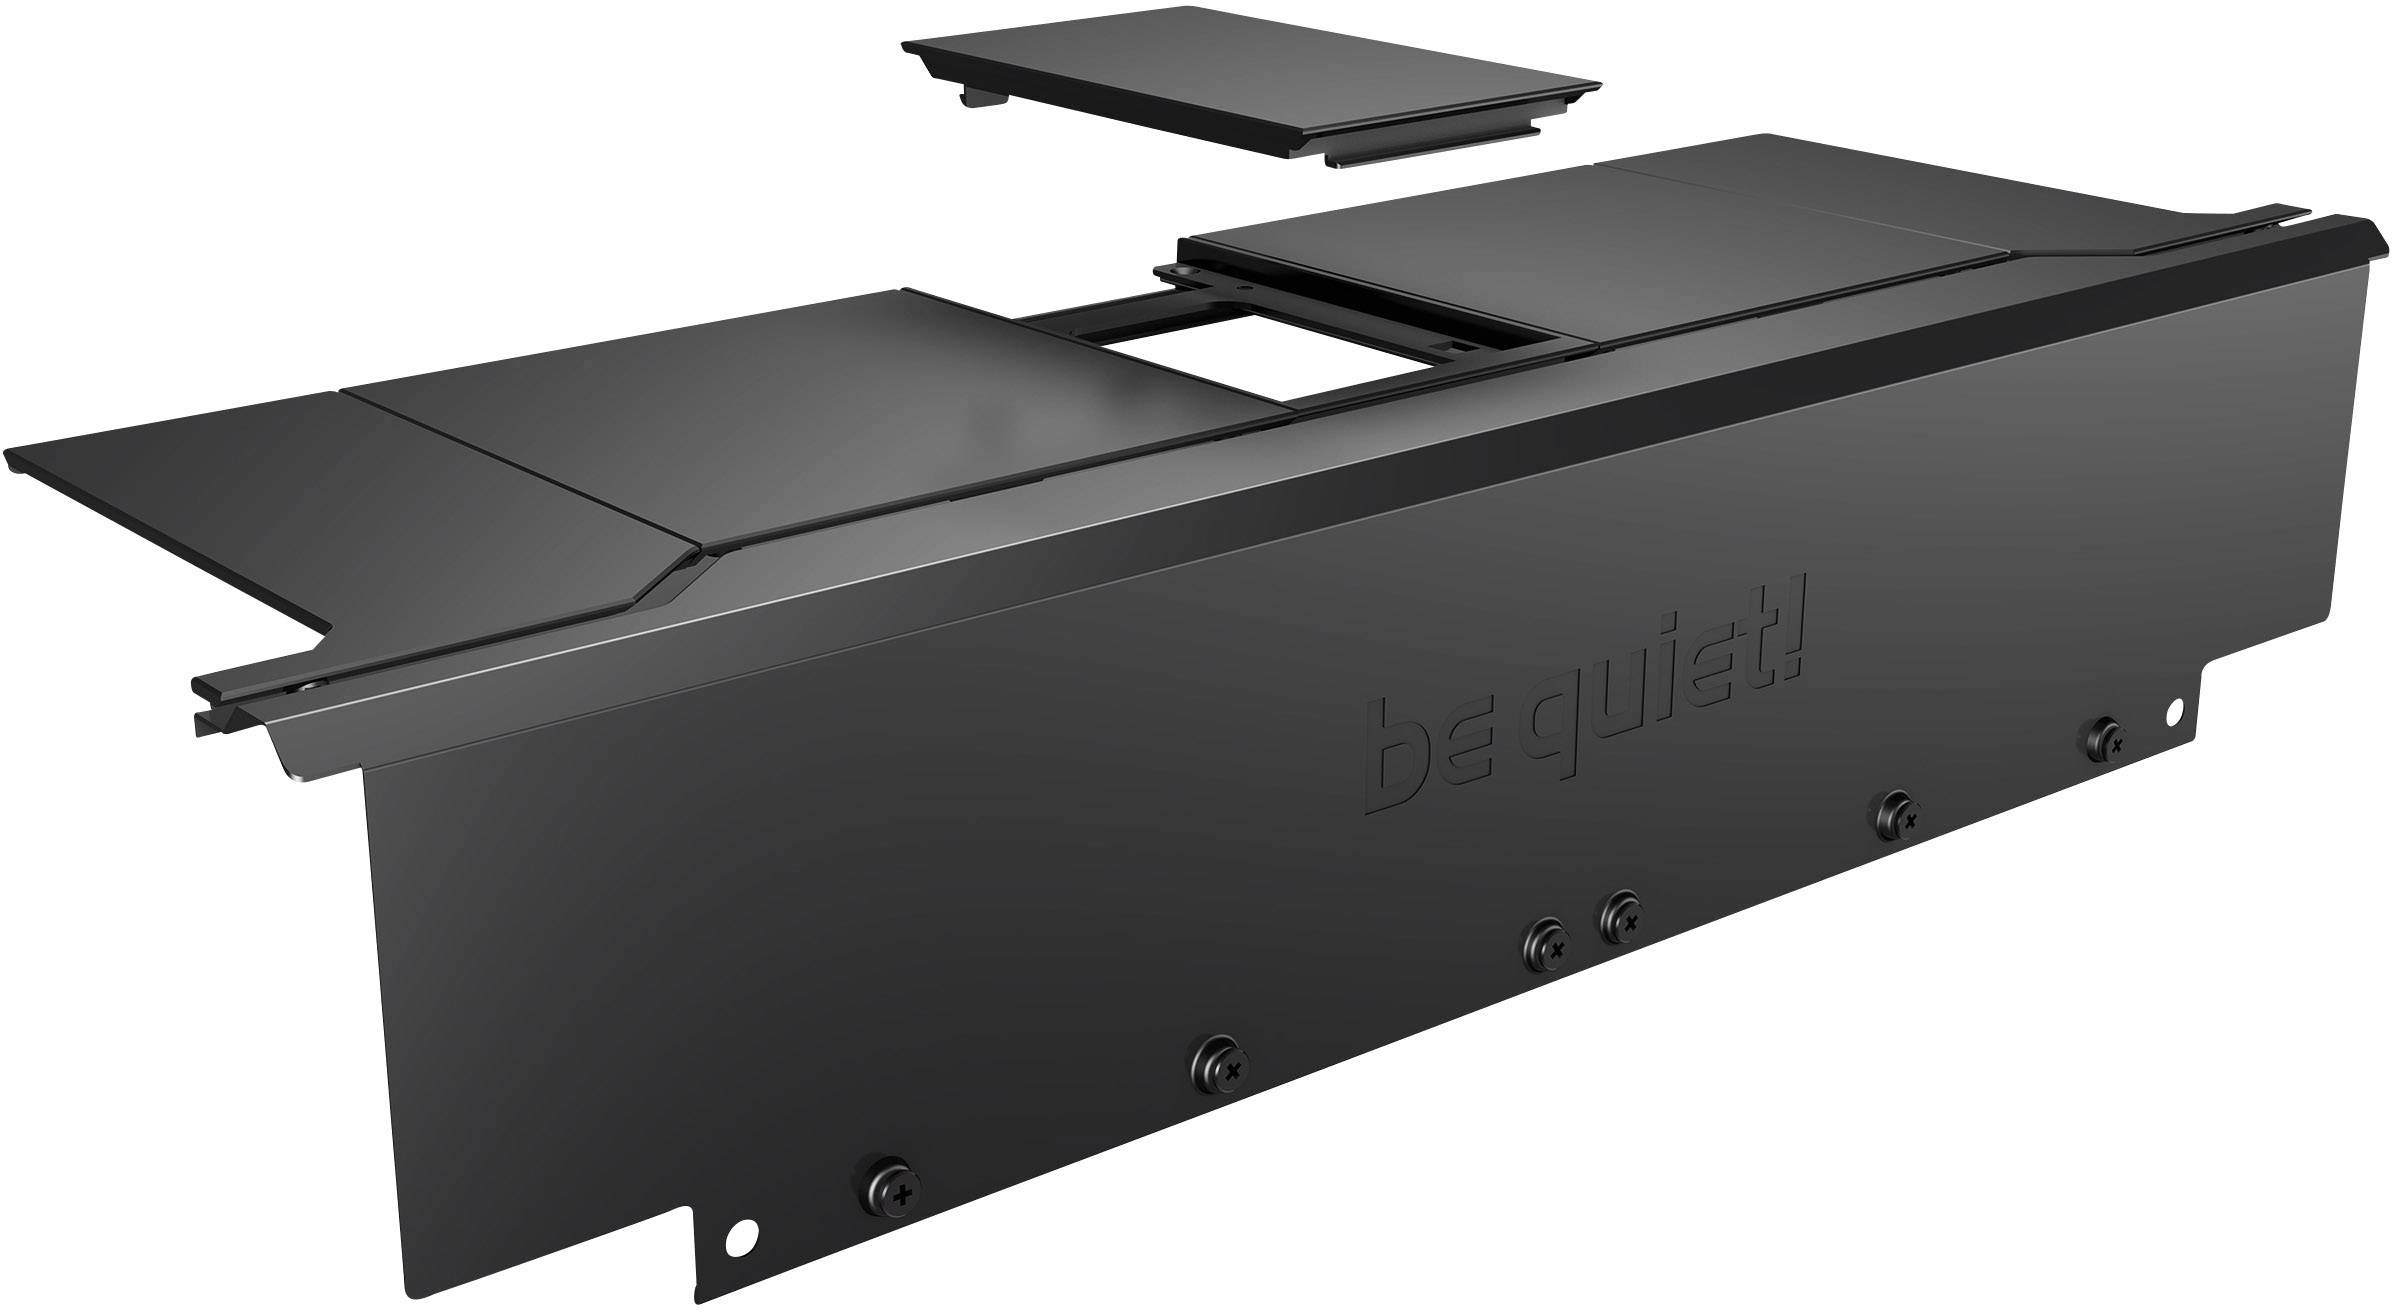 Bequiet Psu Shroud Db900 Pc Psu Cover Compatible With Be Quiet